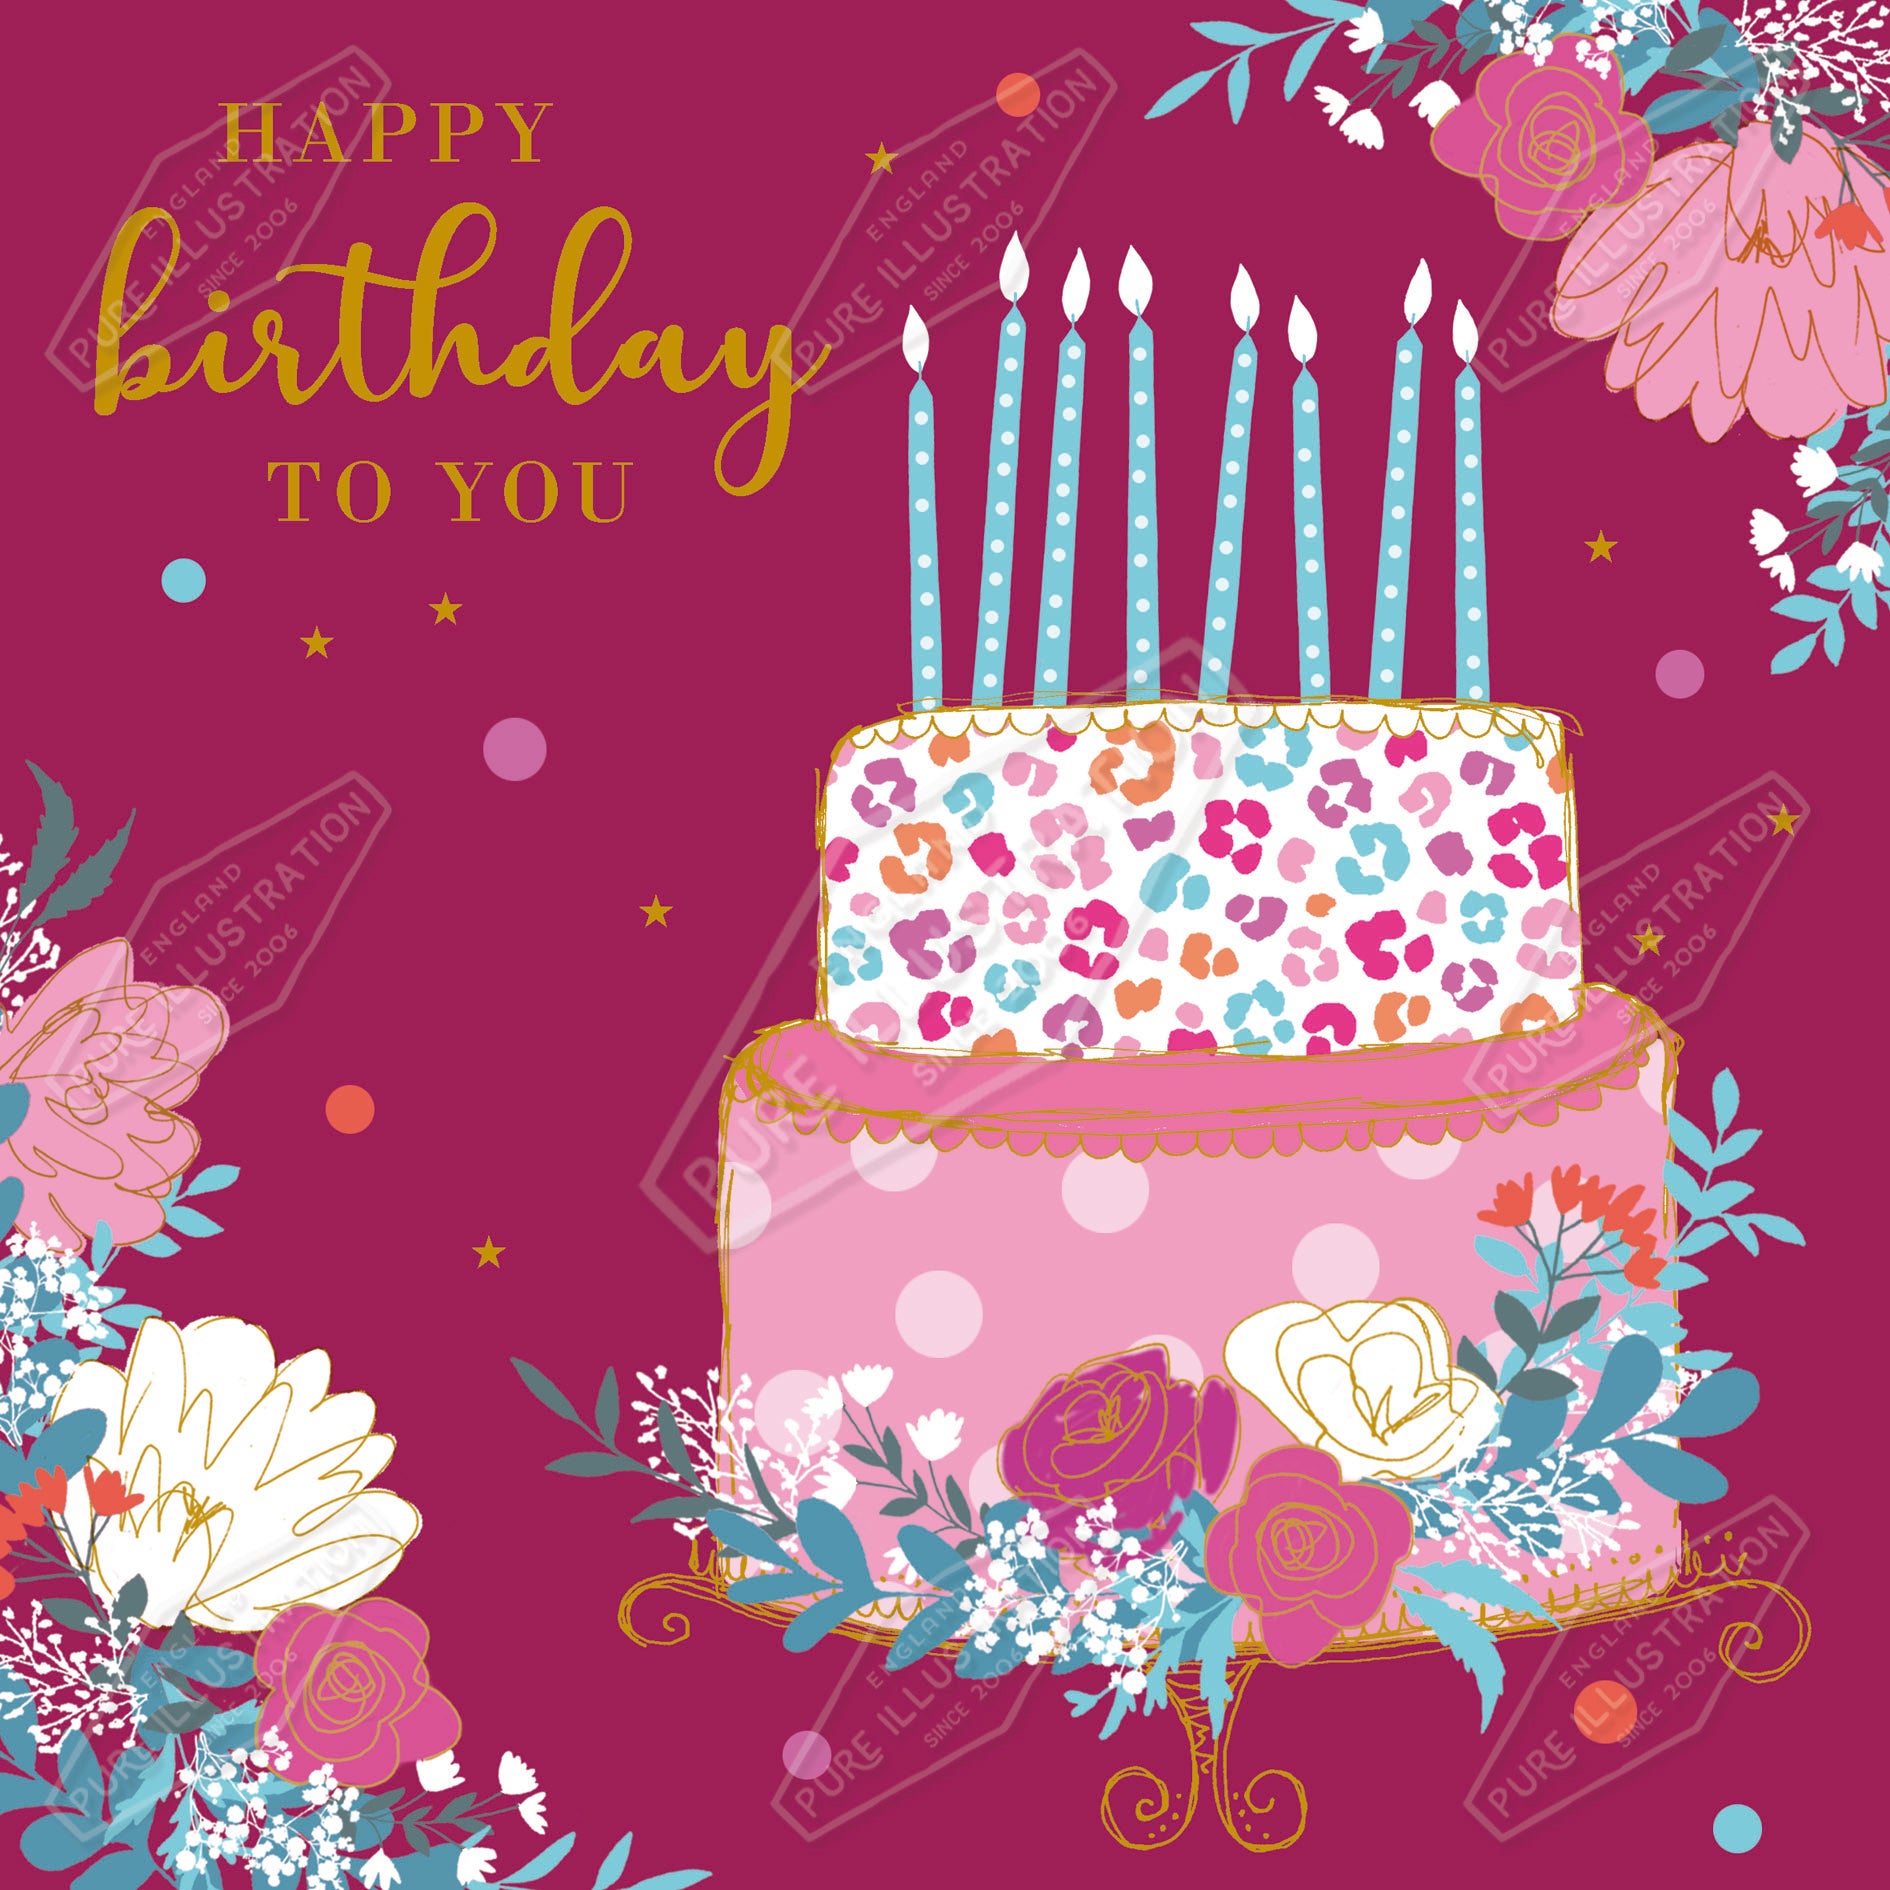 00035461CMI - Caitlin Miller is represented by Pure Art Licensing Agency - Birthday Greeting Card Design